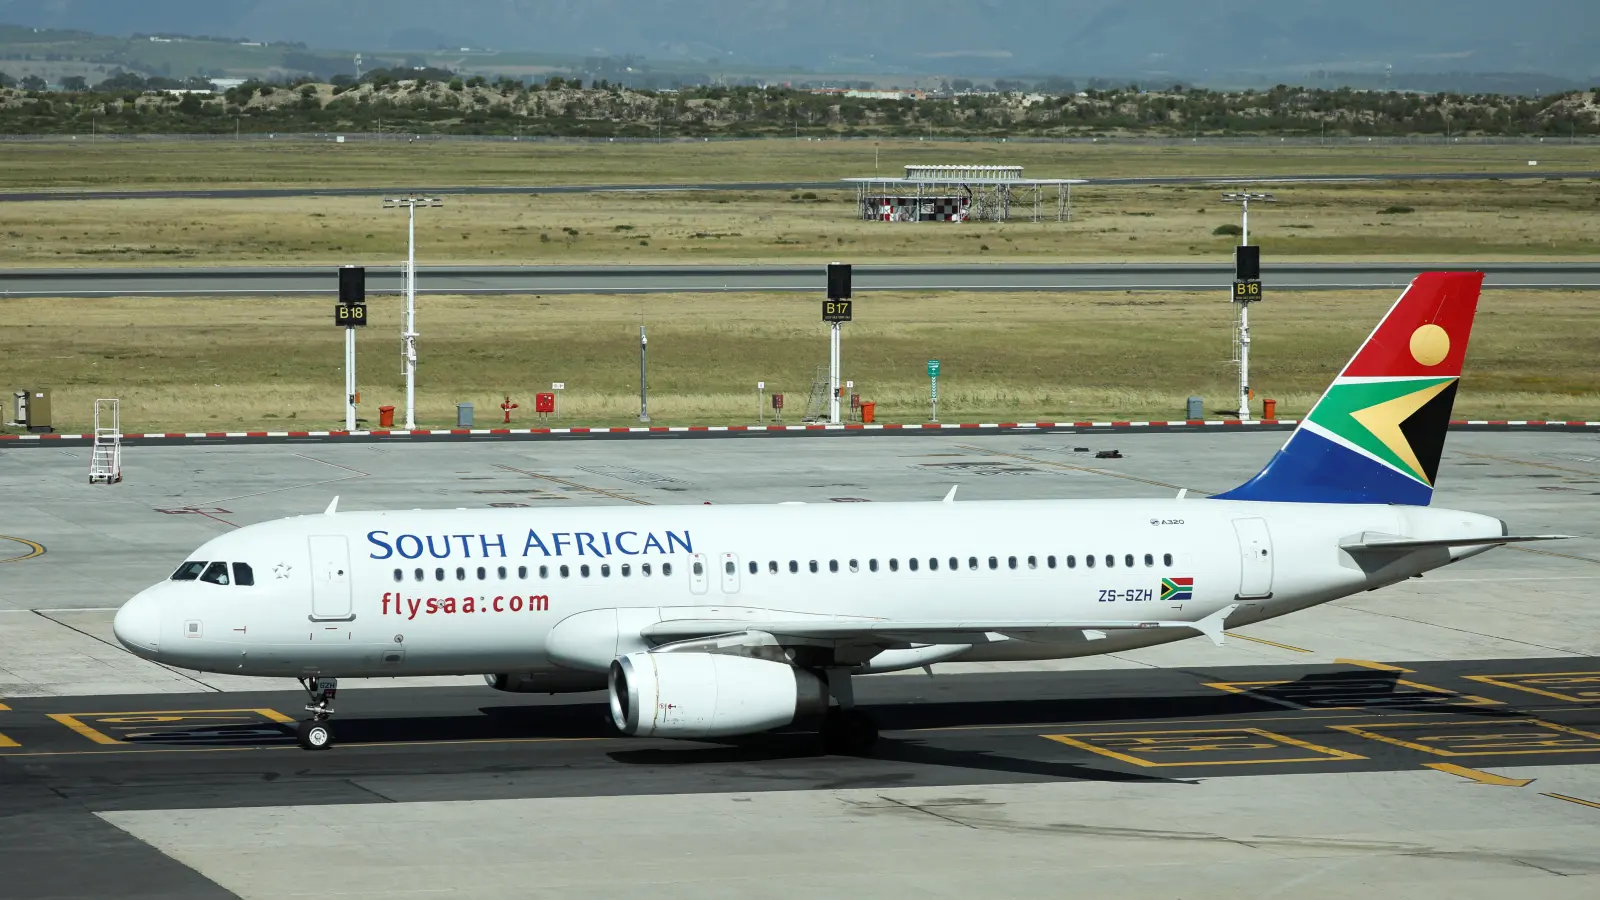 THE SOUTH AFRICAN AIRWAYS